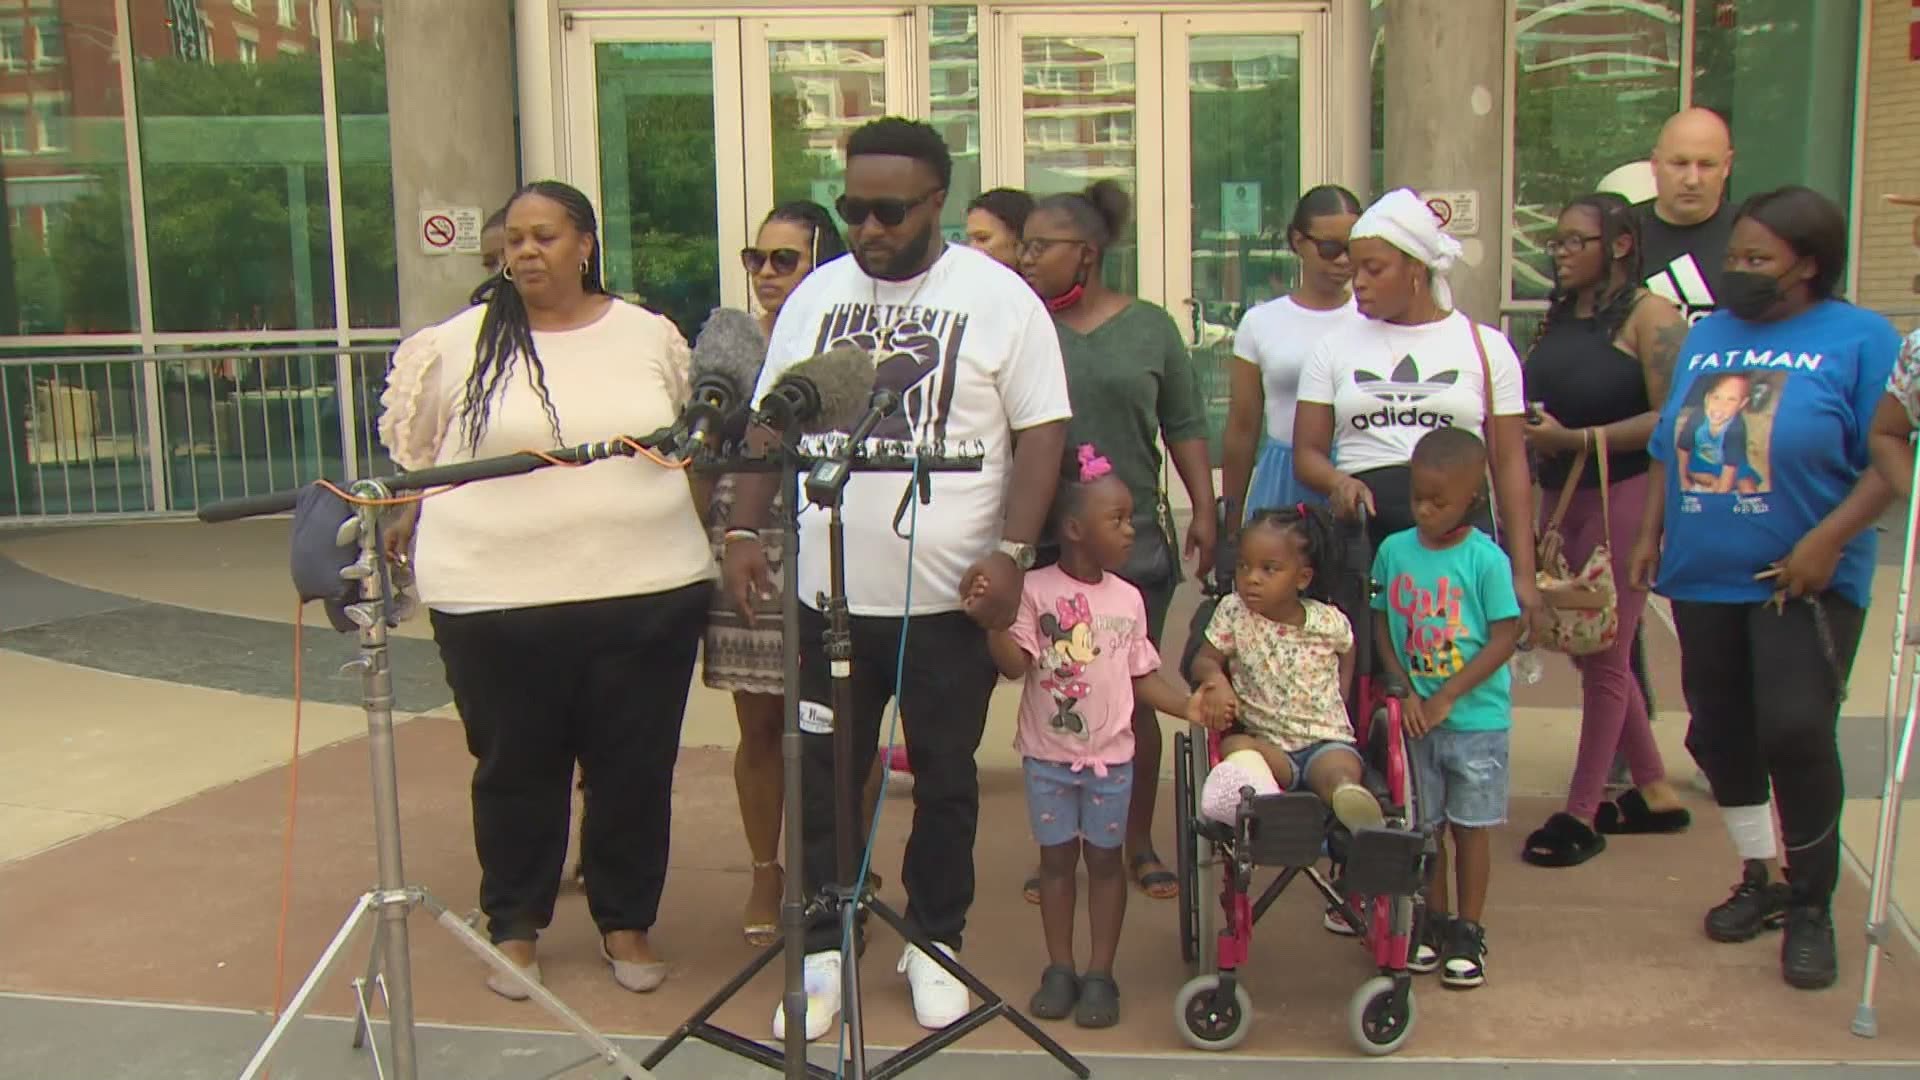 Some residents across the City of Dallas are issuing a call to action. They are planning a protest against violent crime.